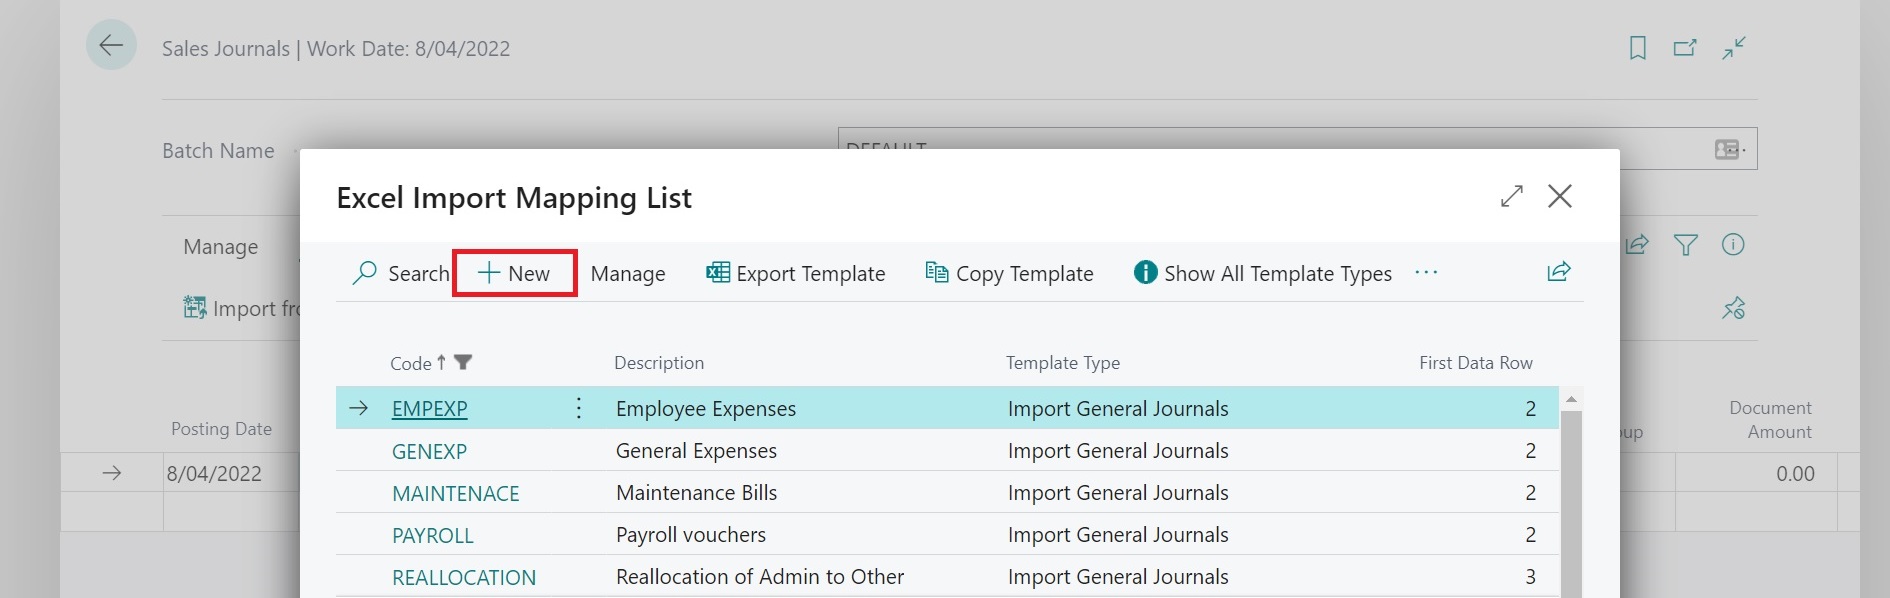 Excel Import Mapping List